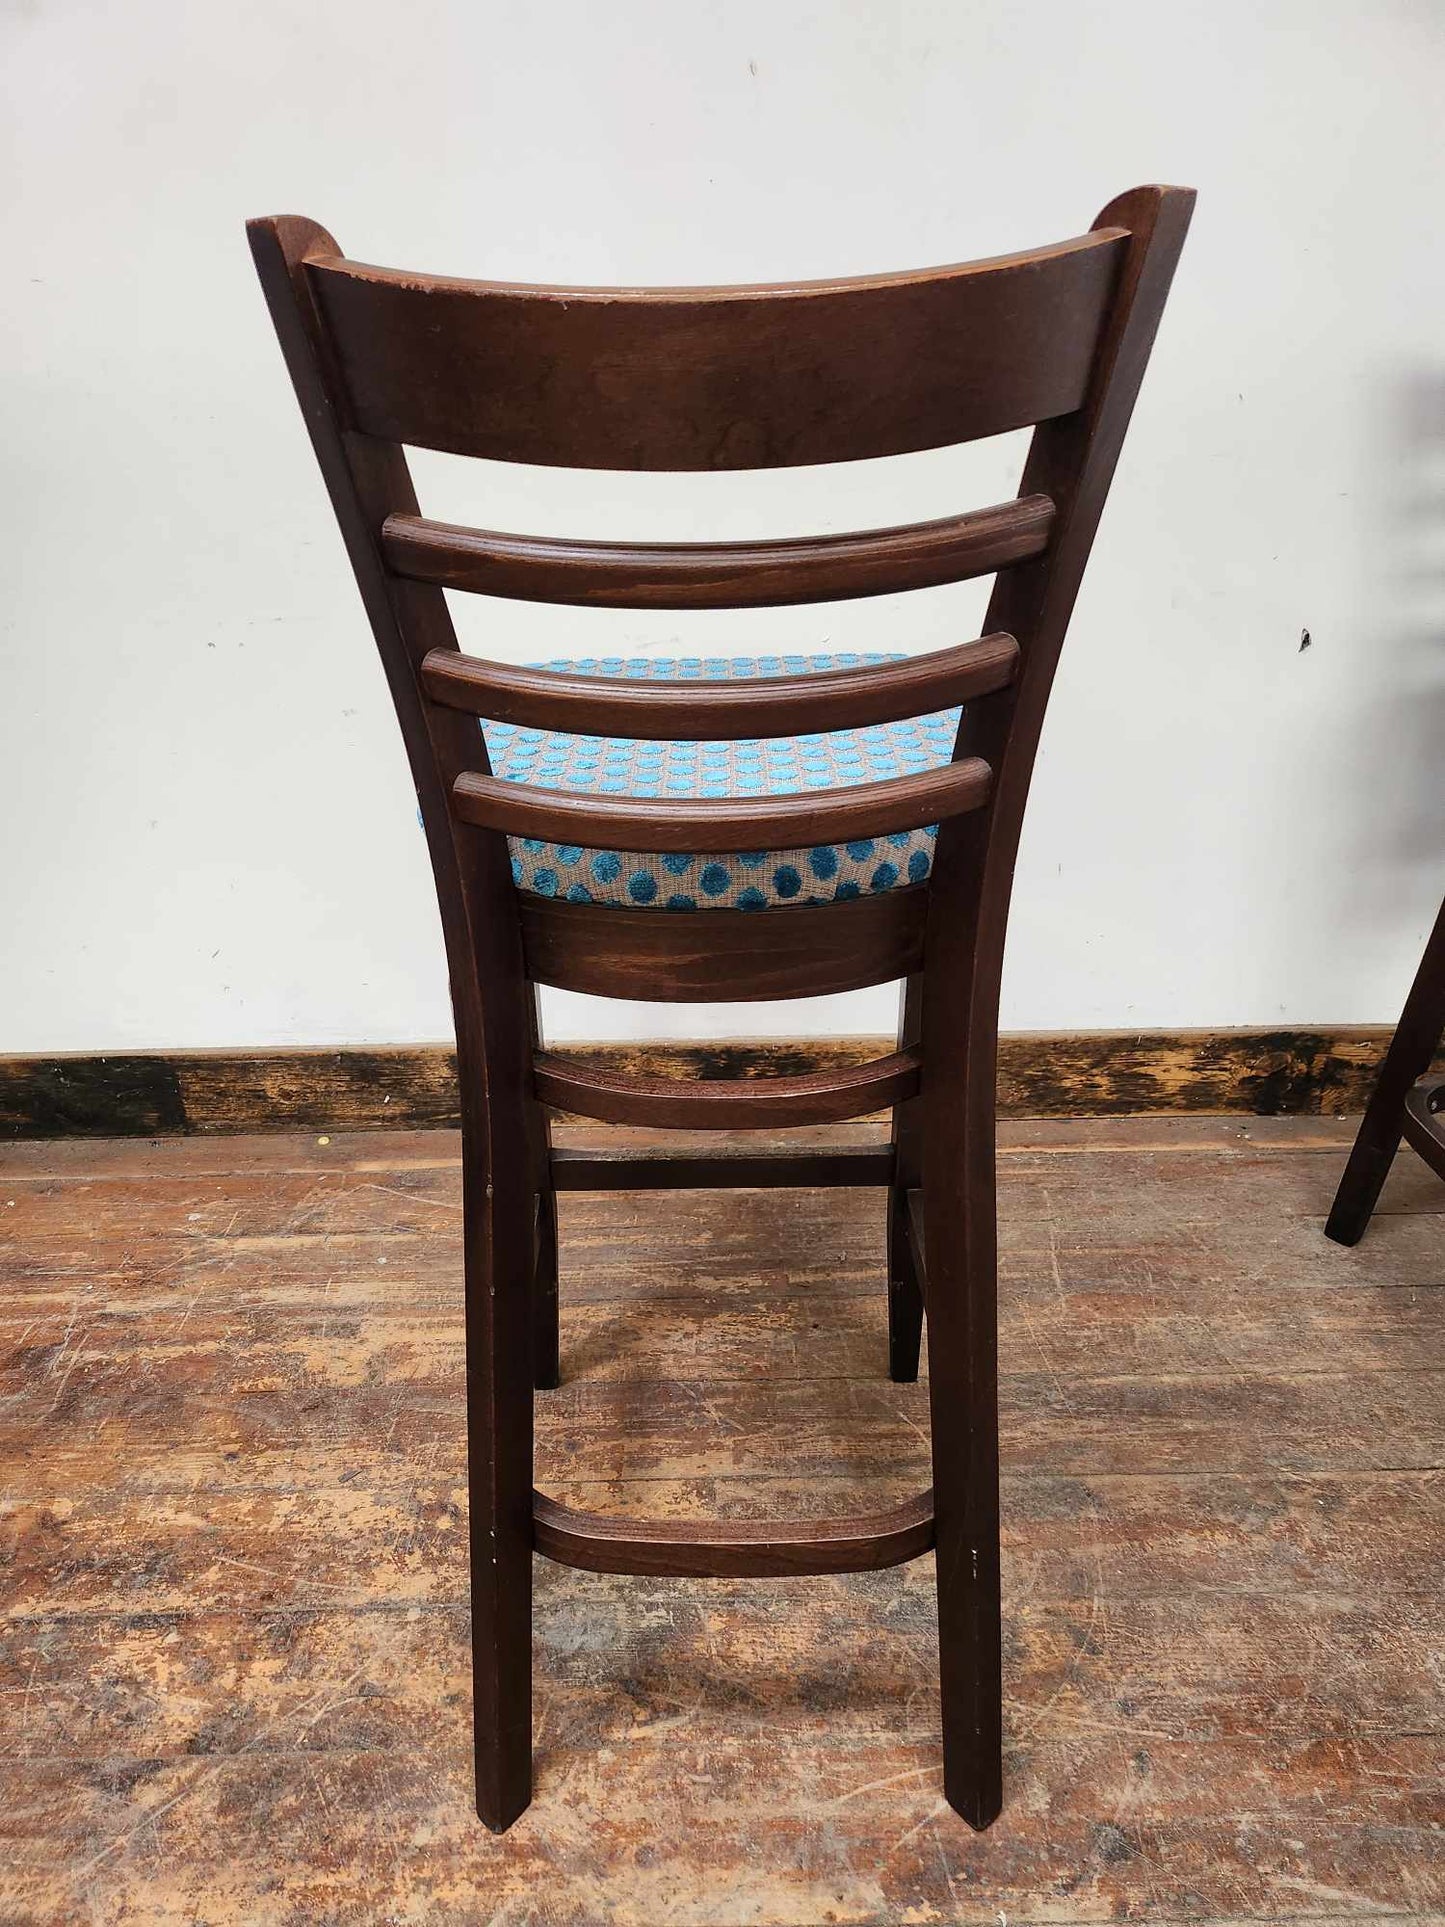 Two High-back Bar Stools with Blue Spotted Upholstery